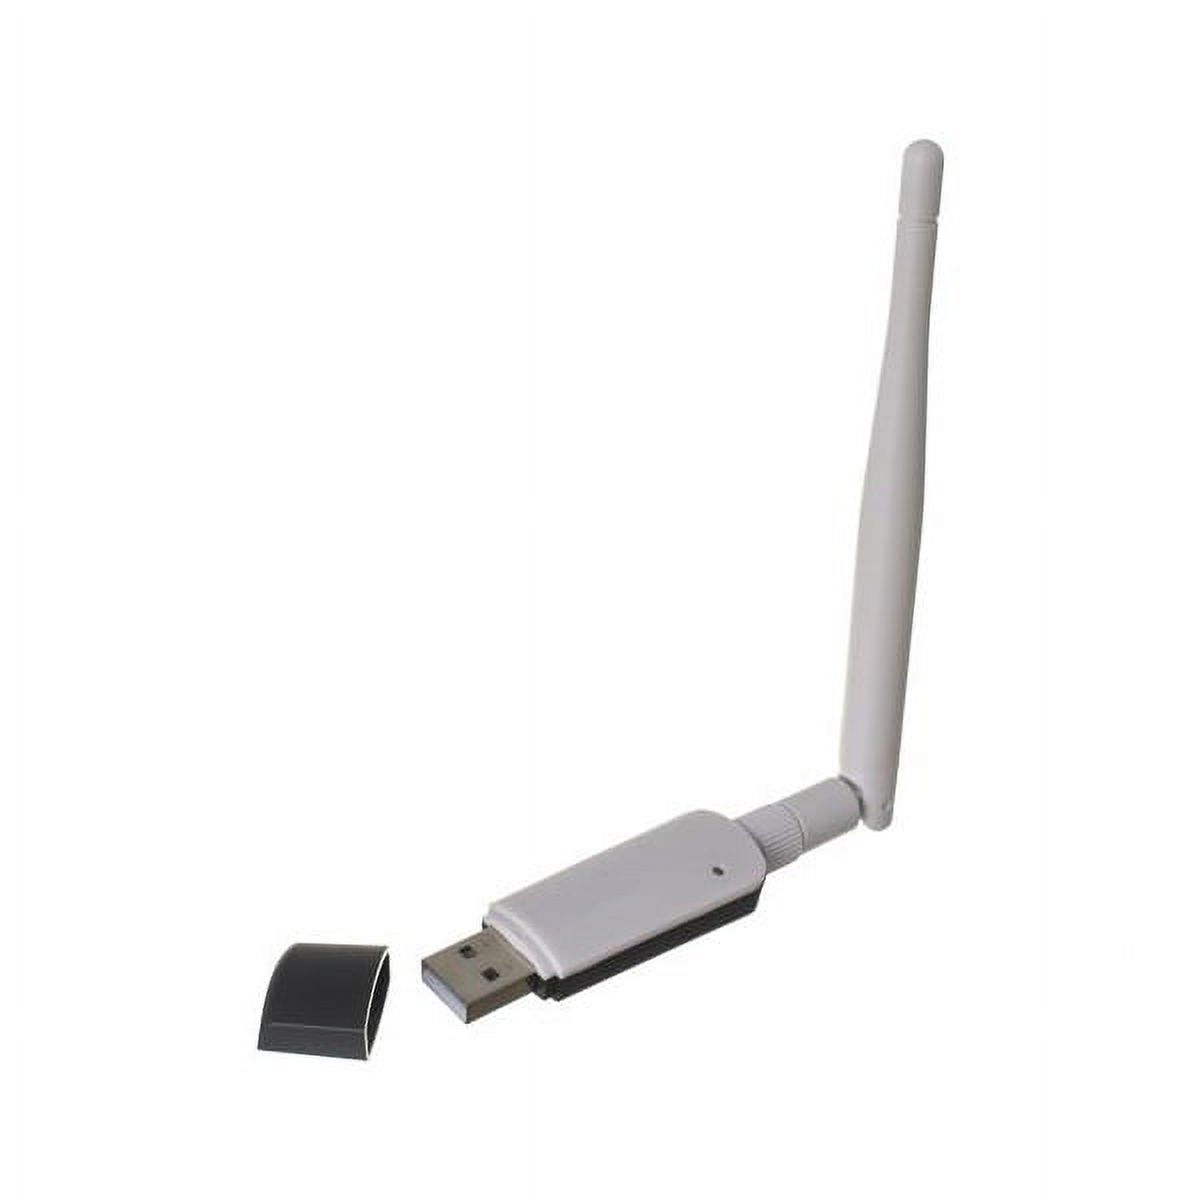 IEC ADP3142-W2 USB 802.11n 150Mbps WiFi Compact Adaptor With Antenna - image 1 of 4